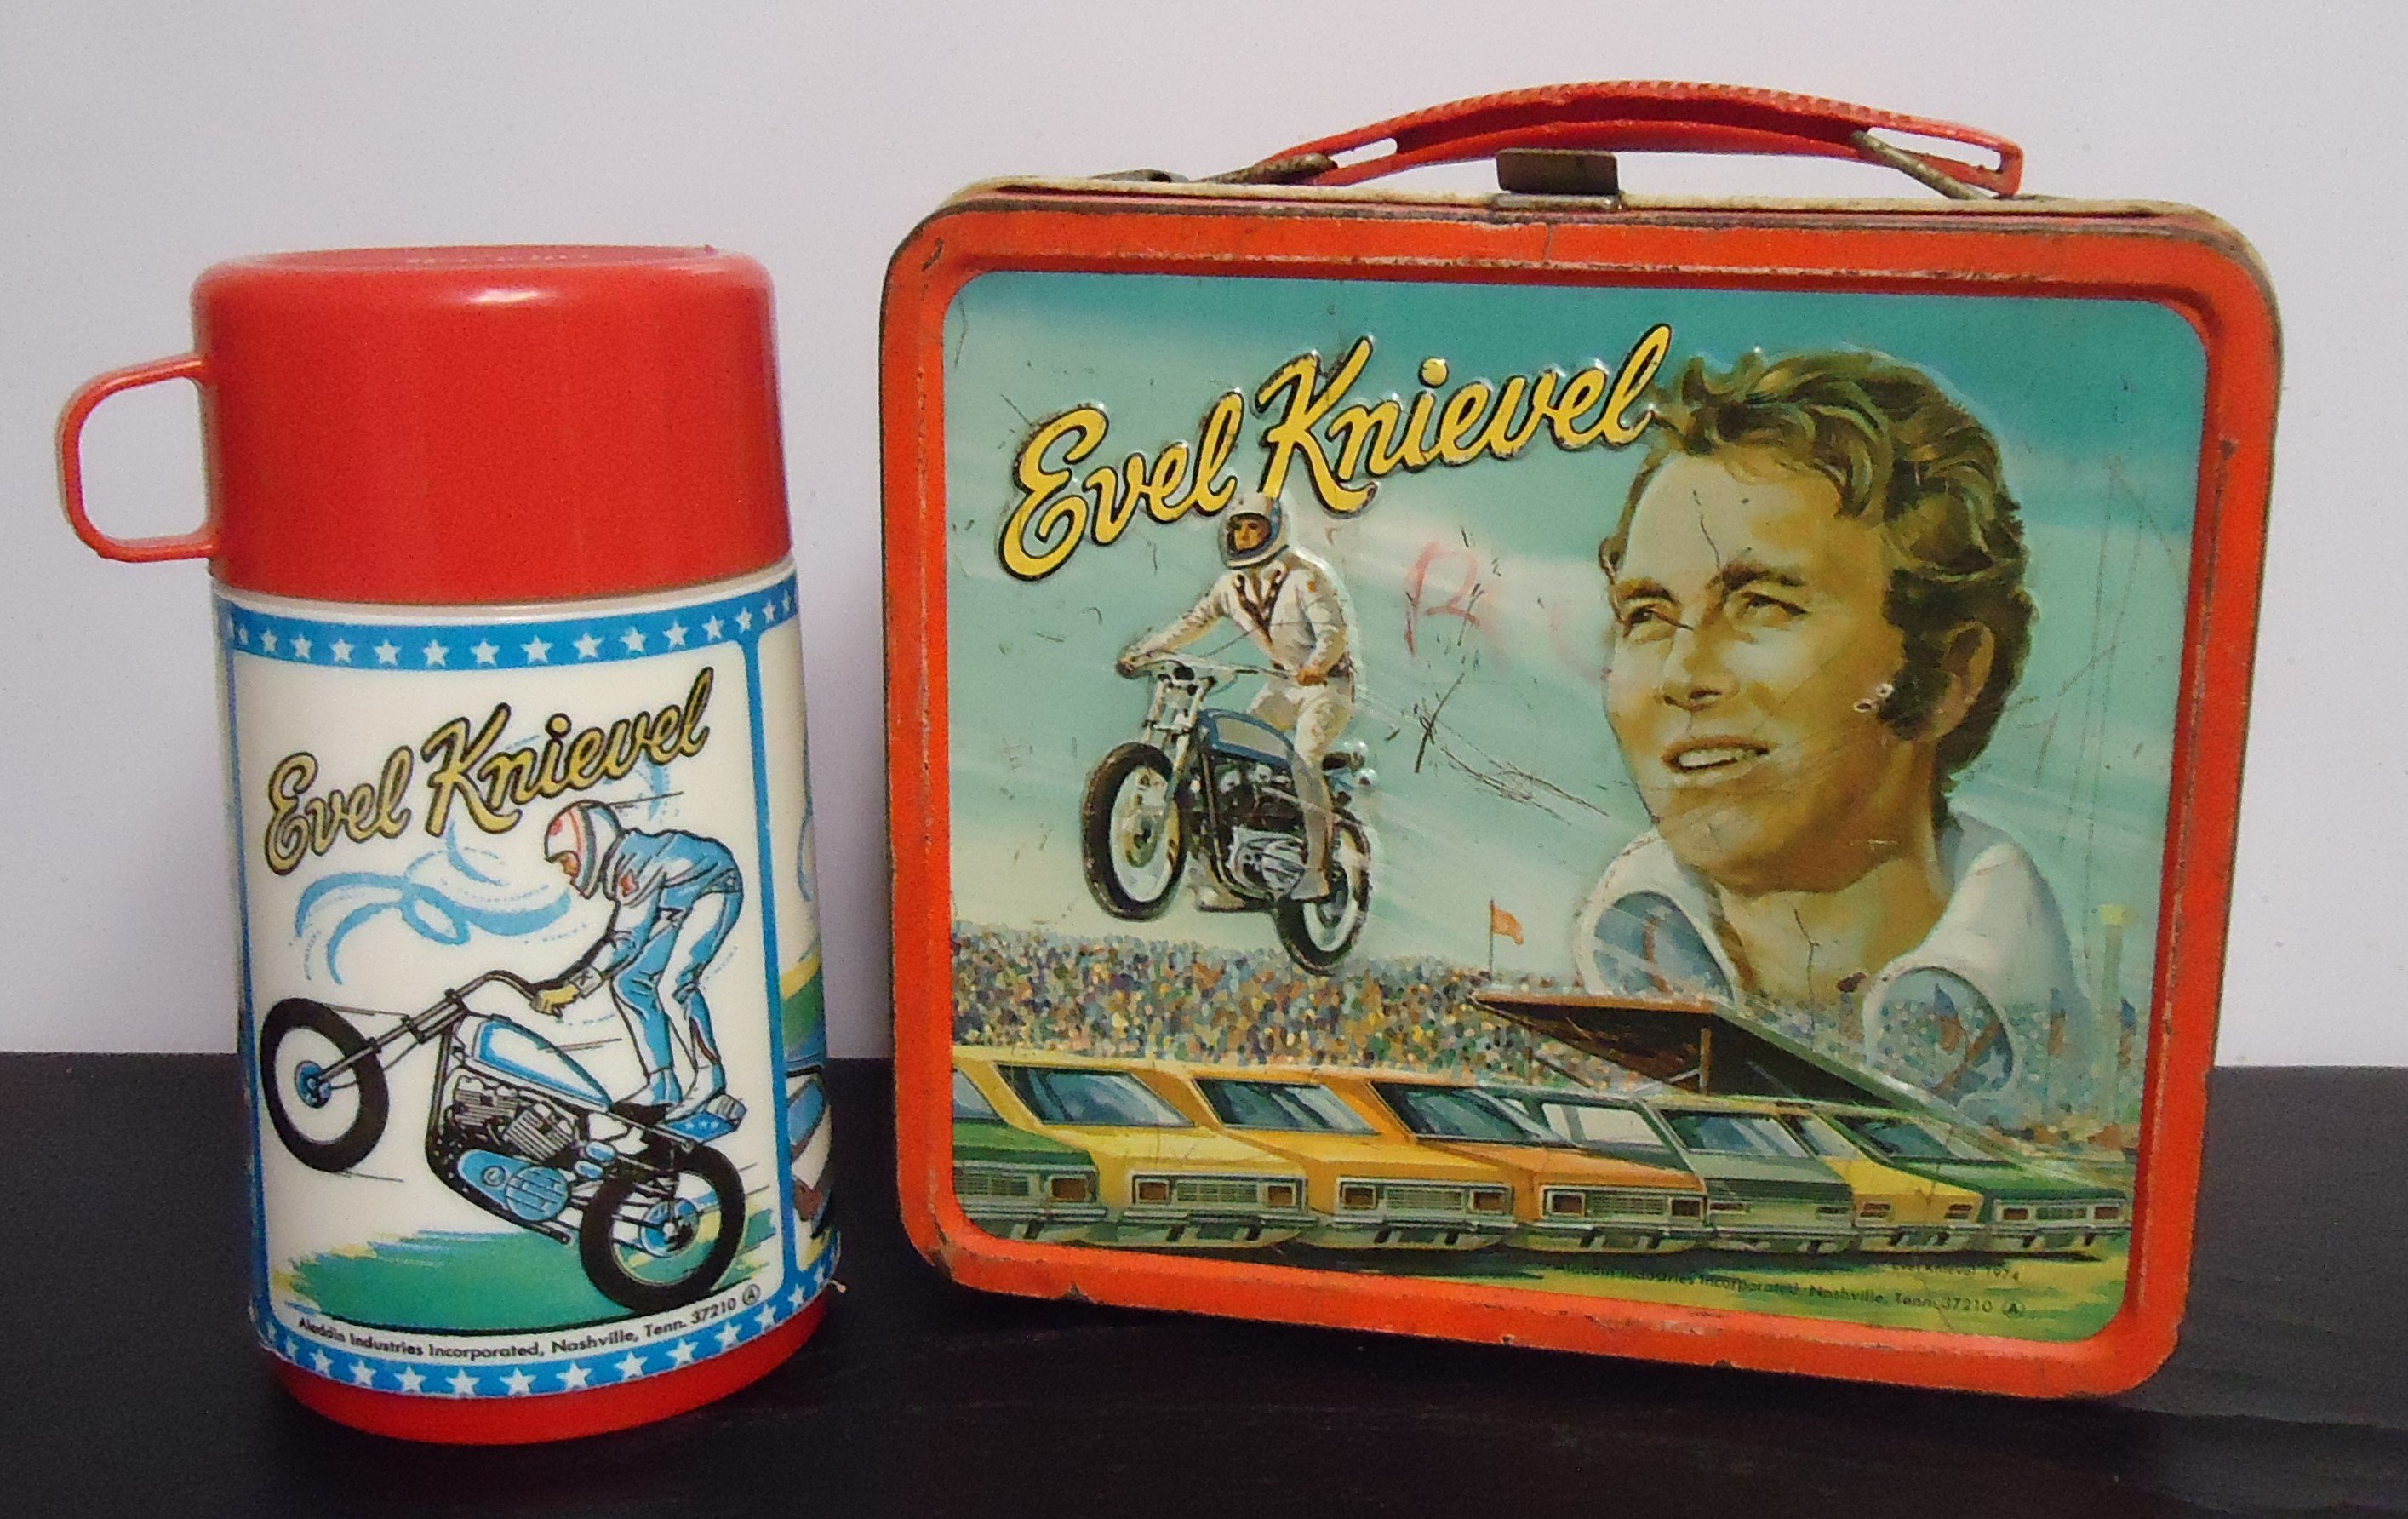 (2) Metal Lunch Box W/ Thermos
"Evel Knievel"
$200.00